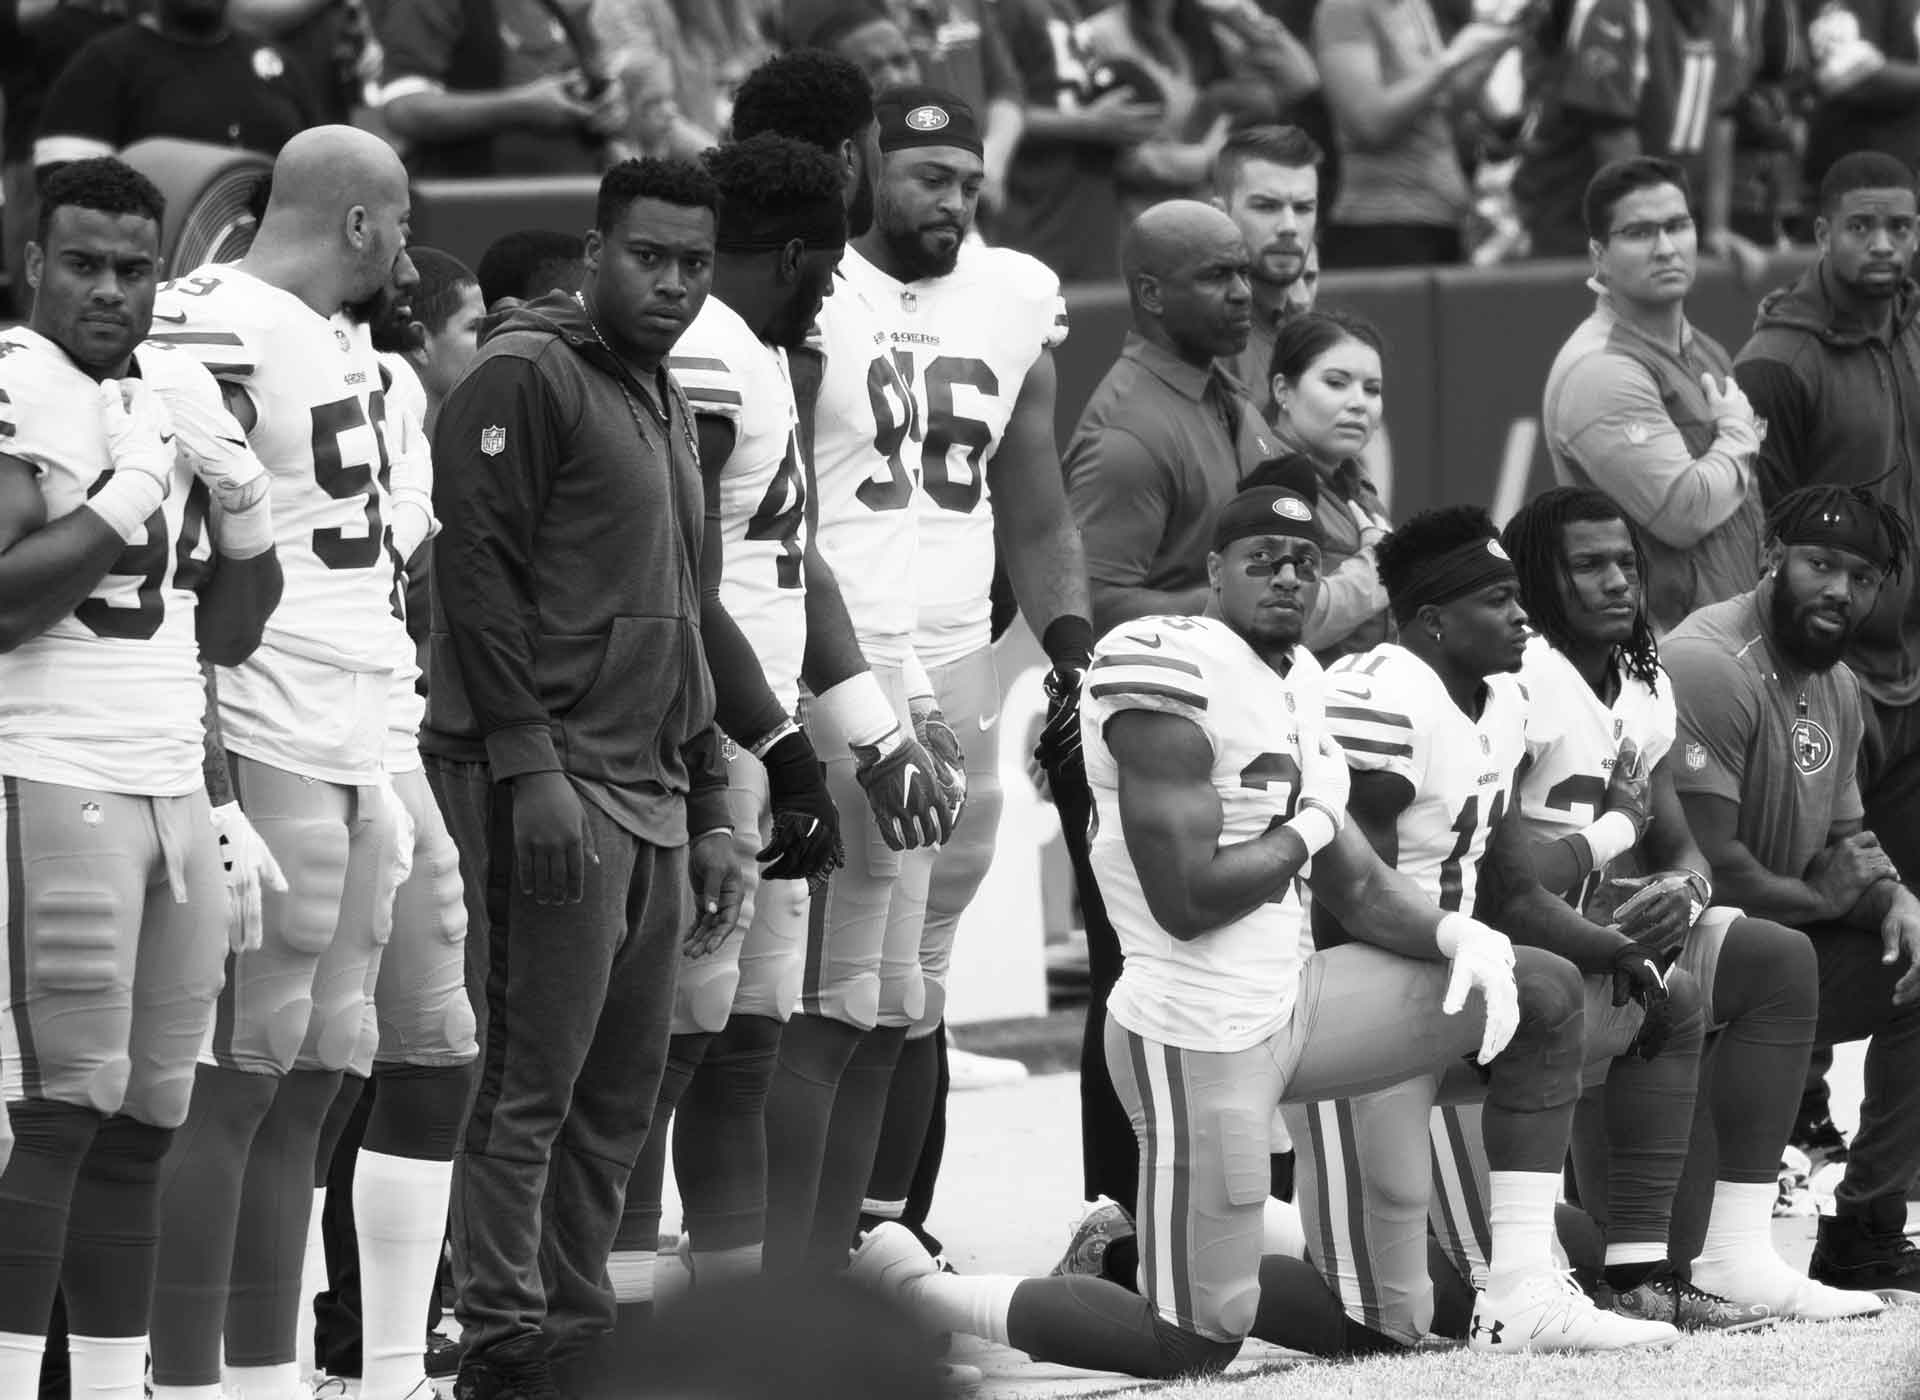 Some members of the San Francisco 49ers kneel during the National Anthem before a game against the Washington Redskins at FedEx Field on October 15, 2017 in Landover, Maryland.